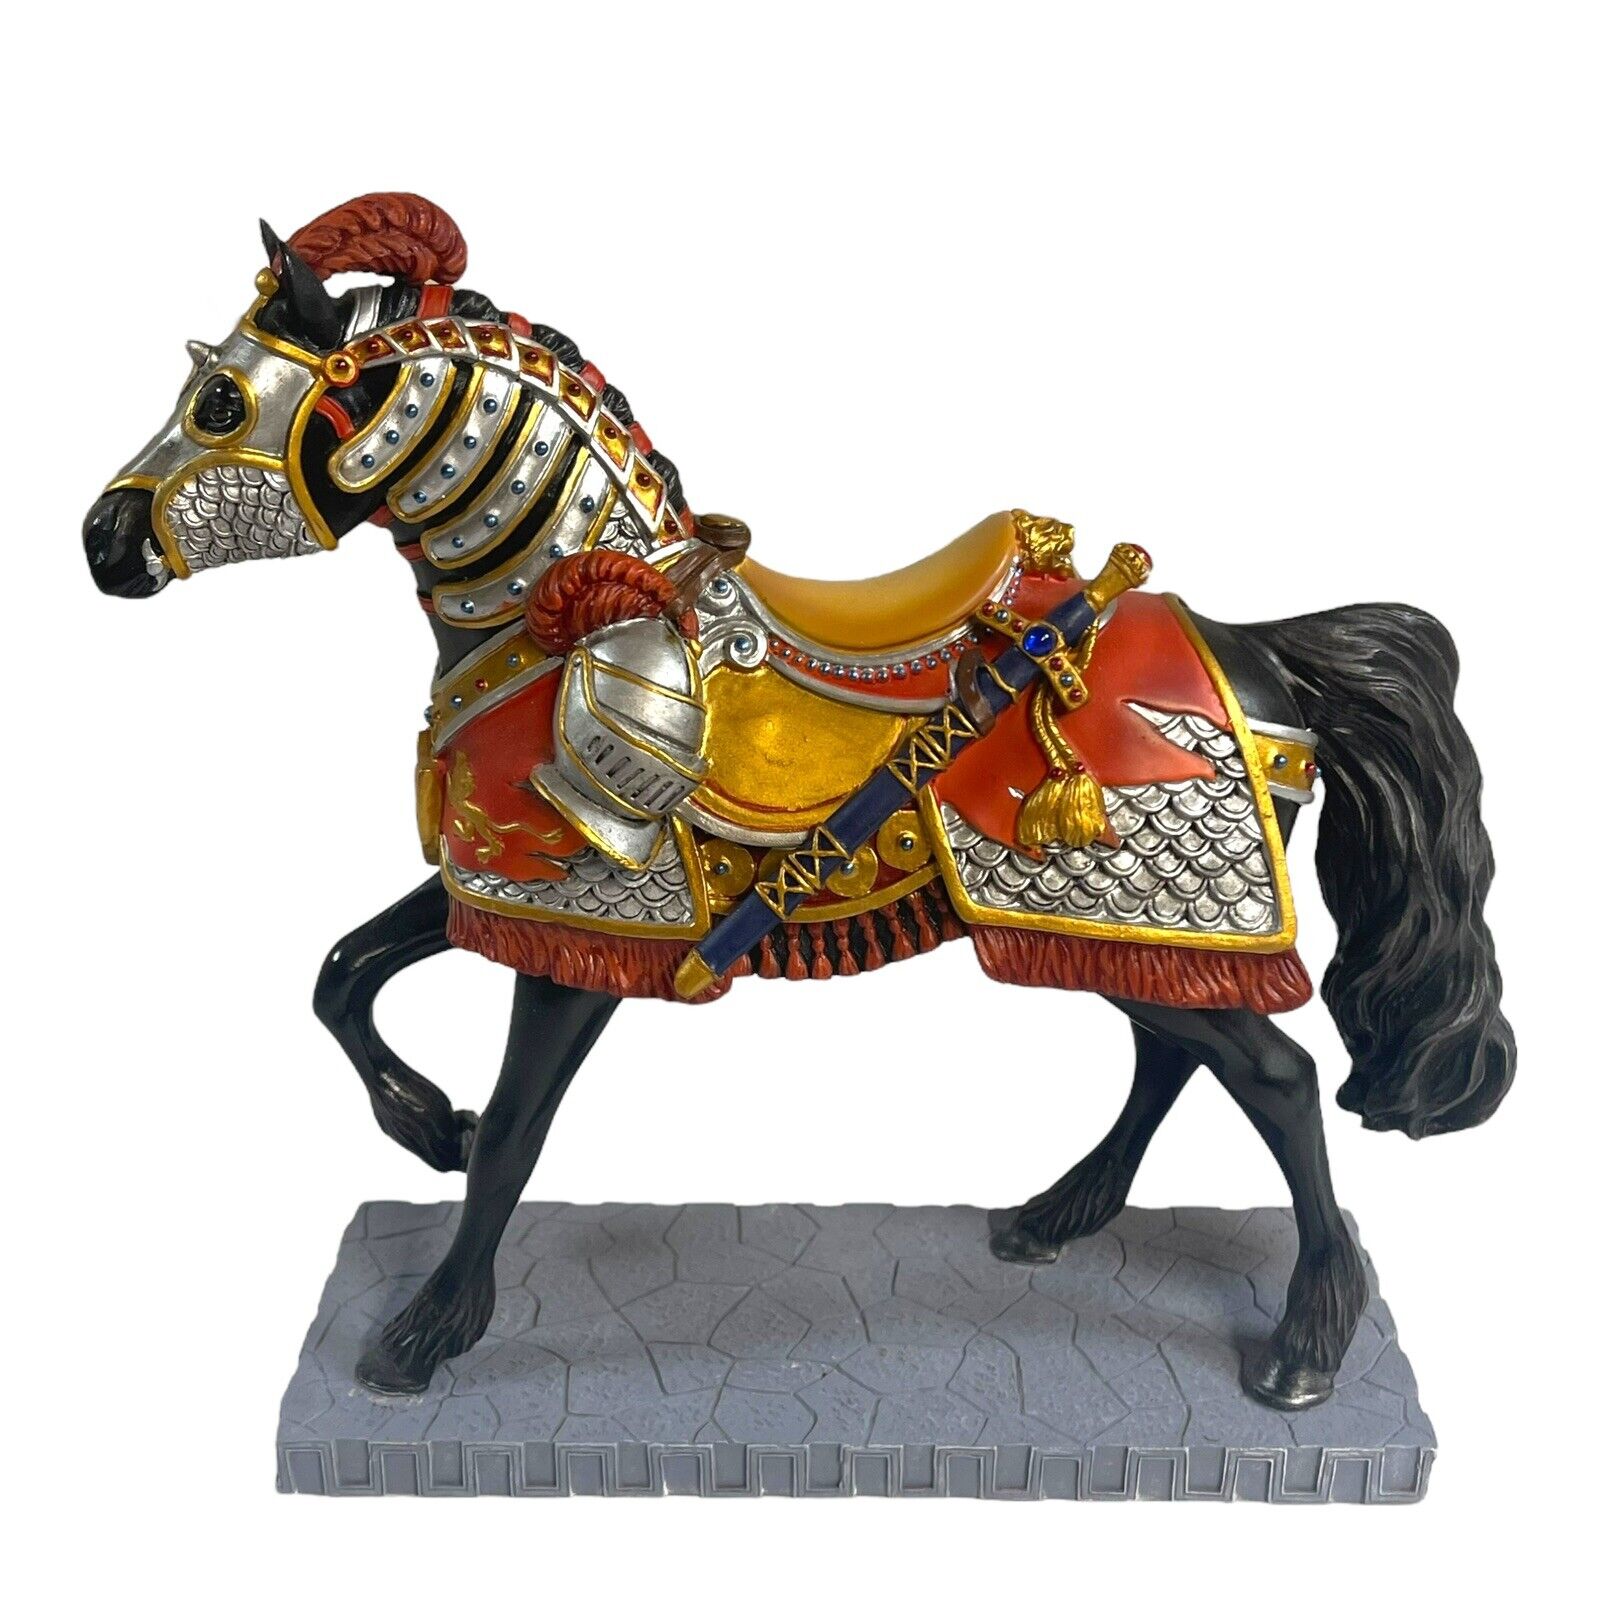 The Trail of Painted Ponies Super Charger No 12232 Rob Barker Renaissance Horse